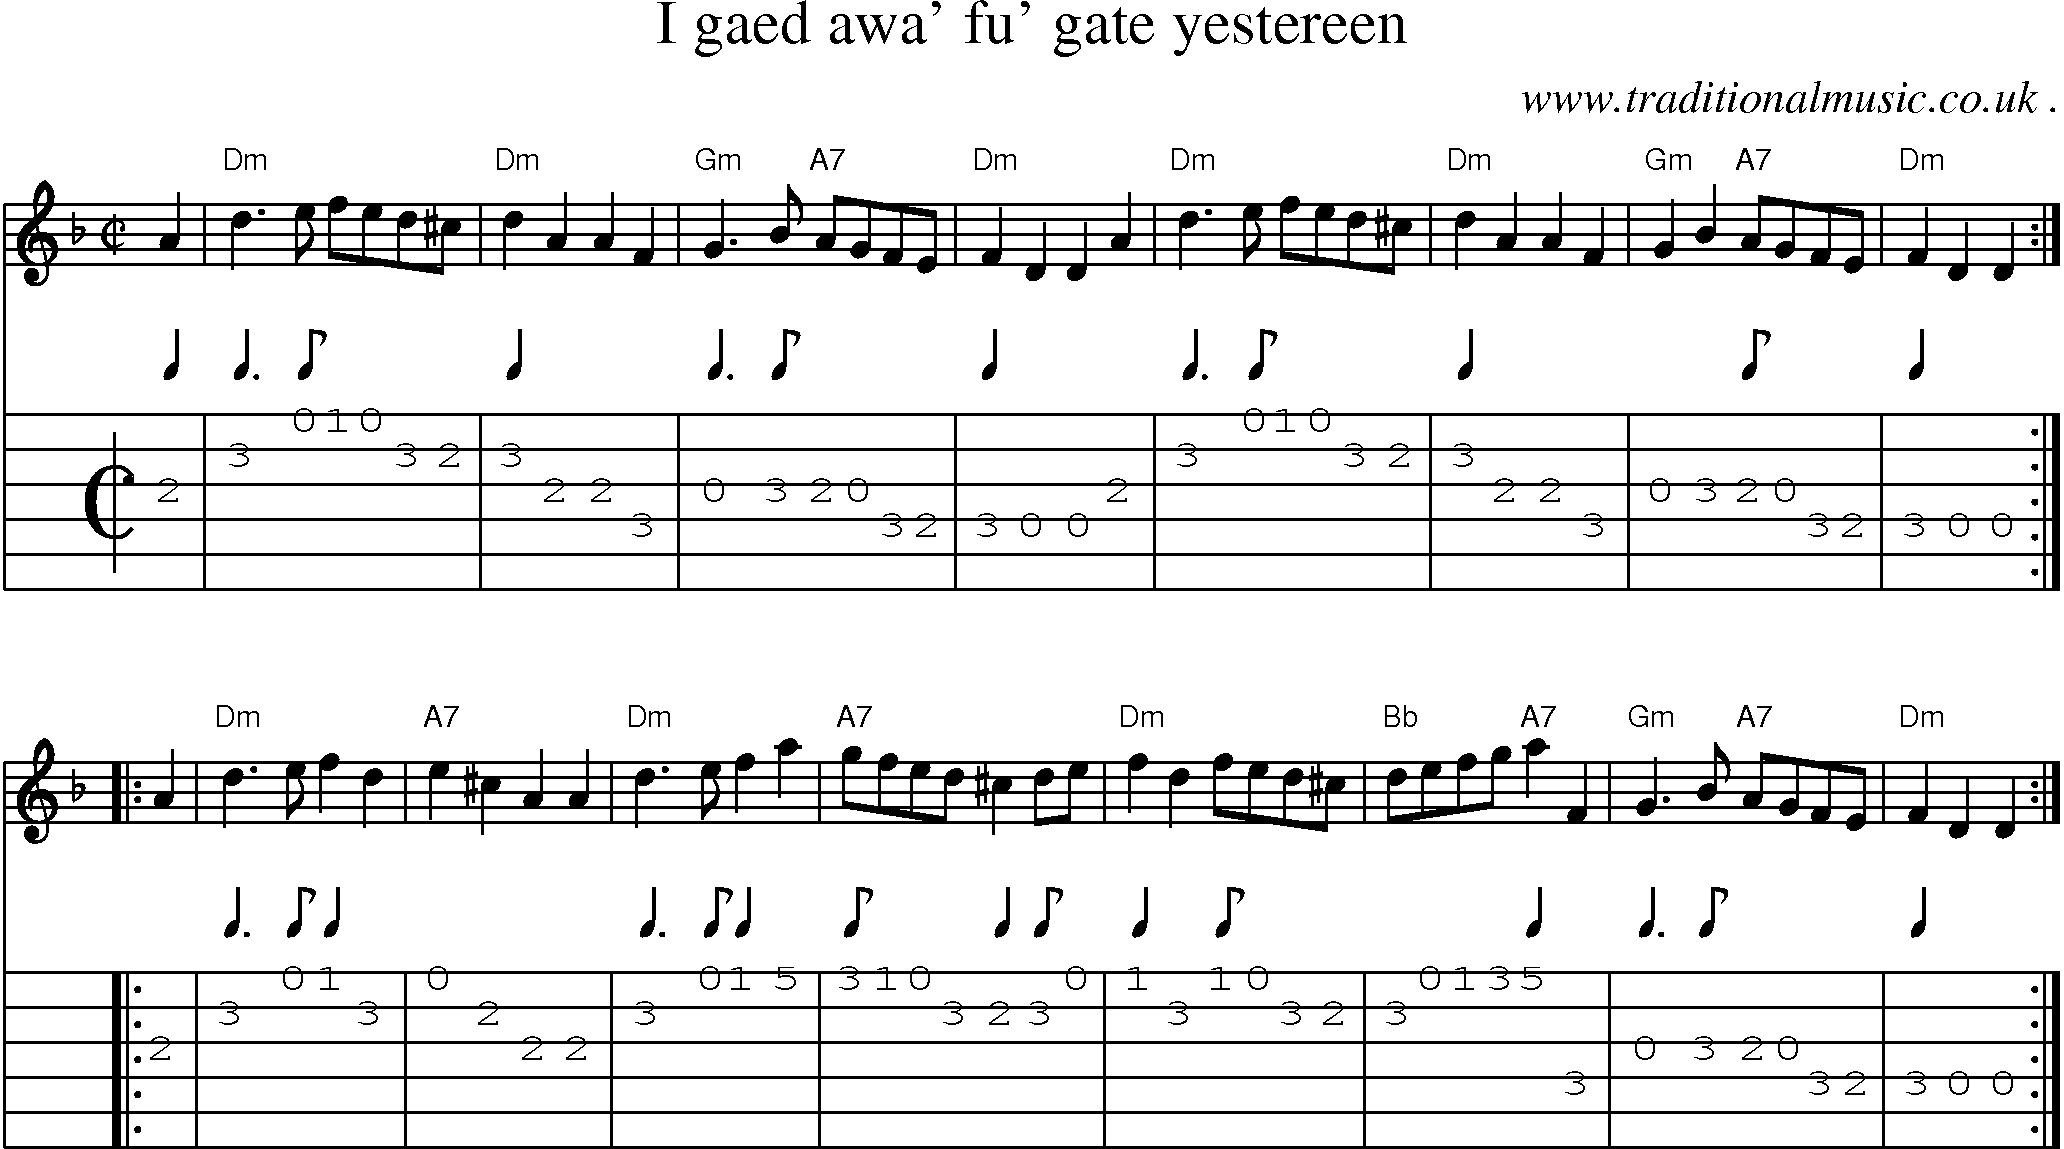 Sheet-music  score, Chords and Guitar Tabs for I Gaed Awa Fu Gate Yestereen